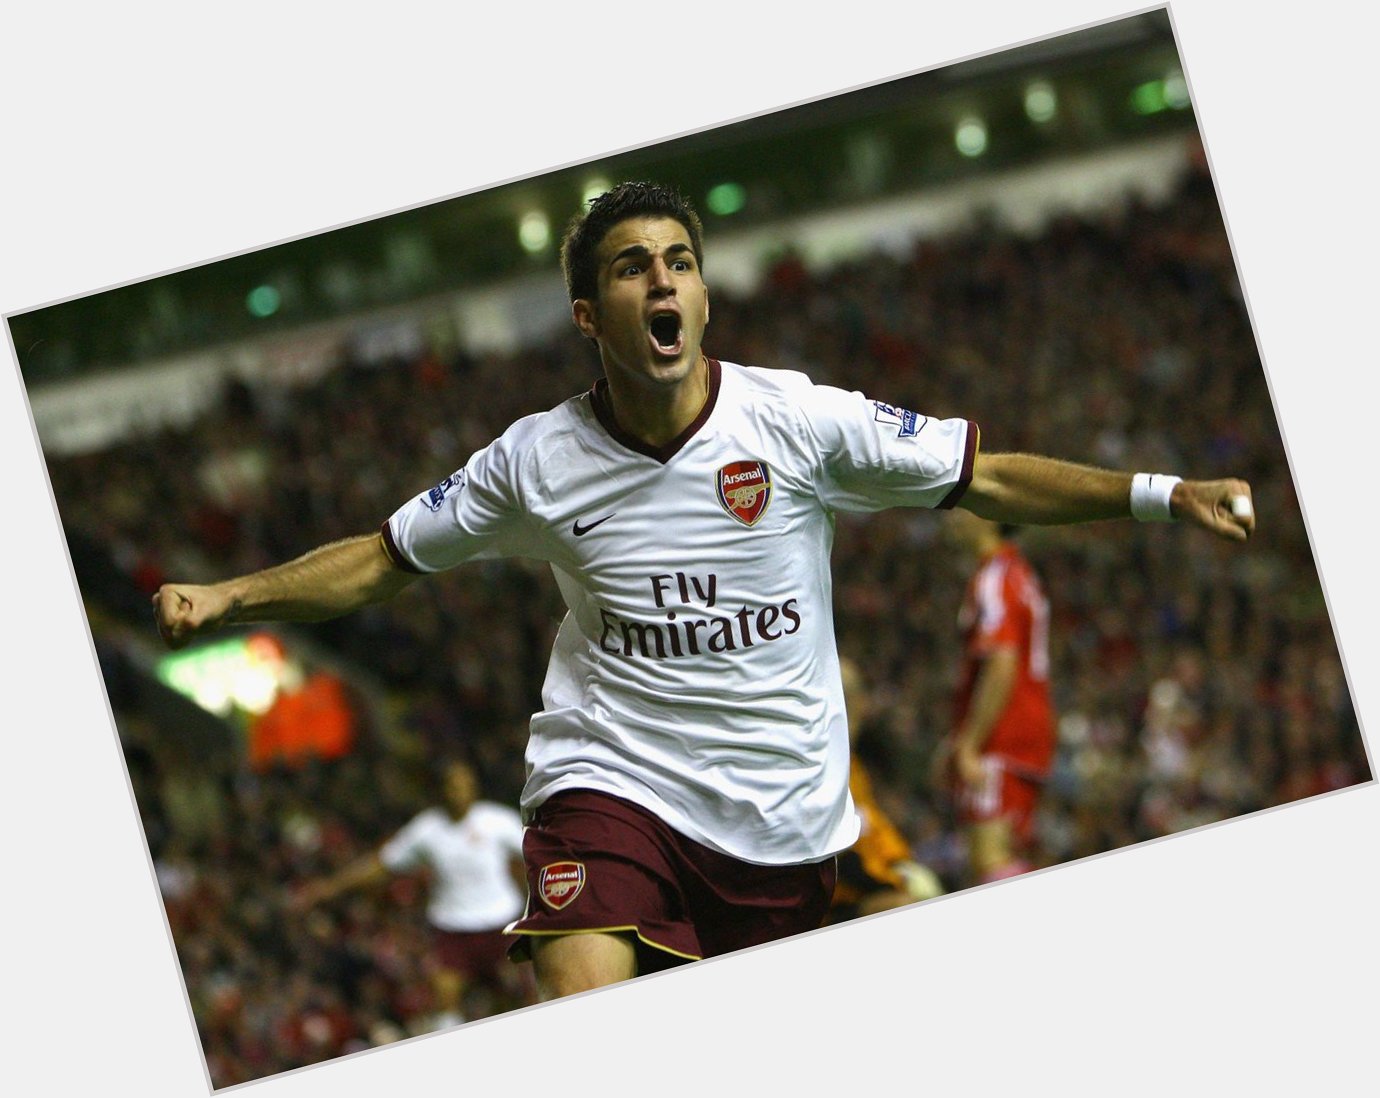 Happy birthday to former Arsenal midfielder and captain Cesc Fabregas, who turns 30 today! 